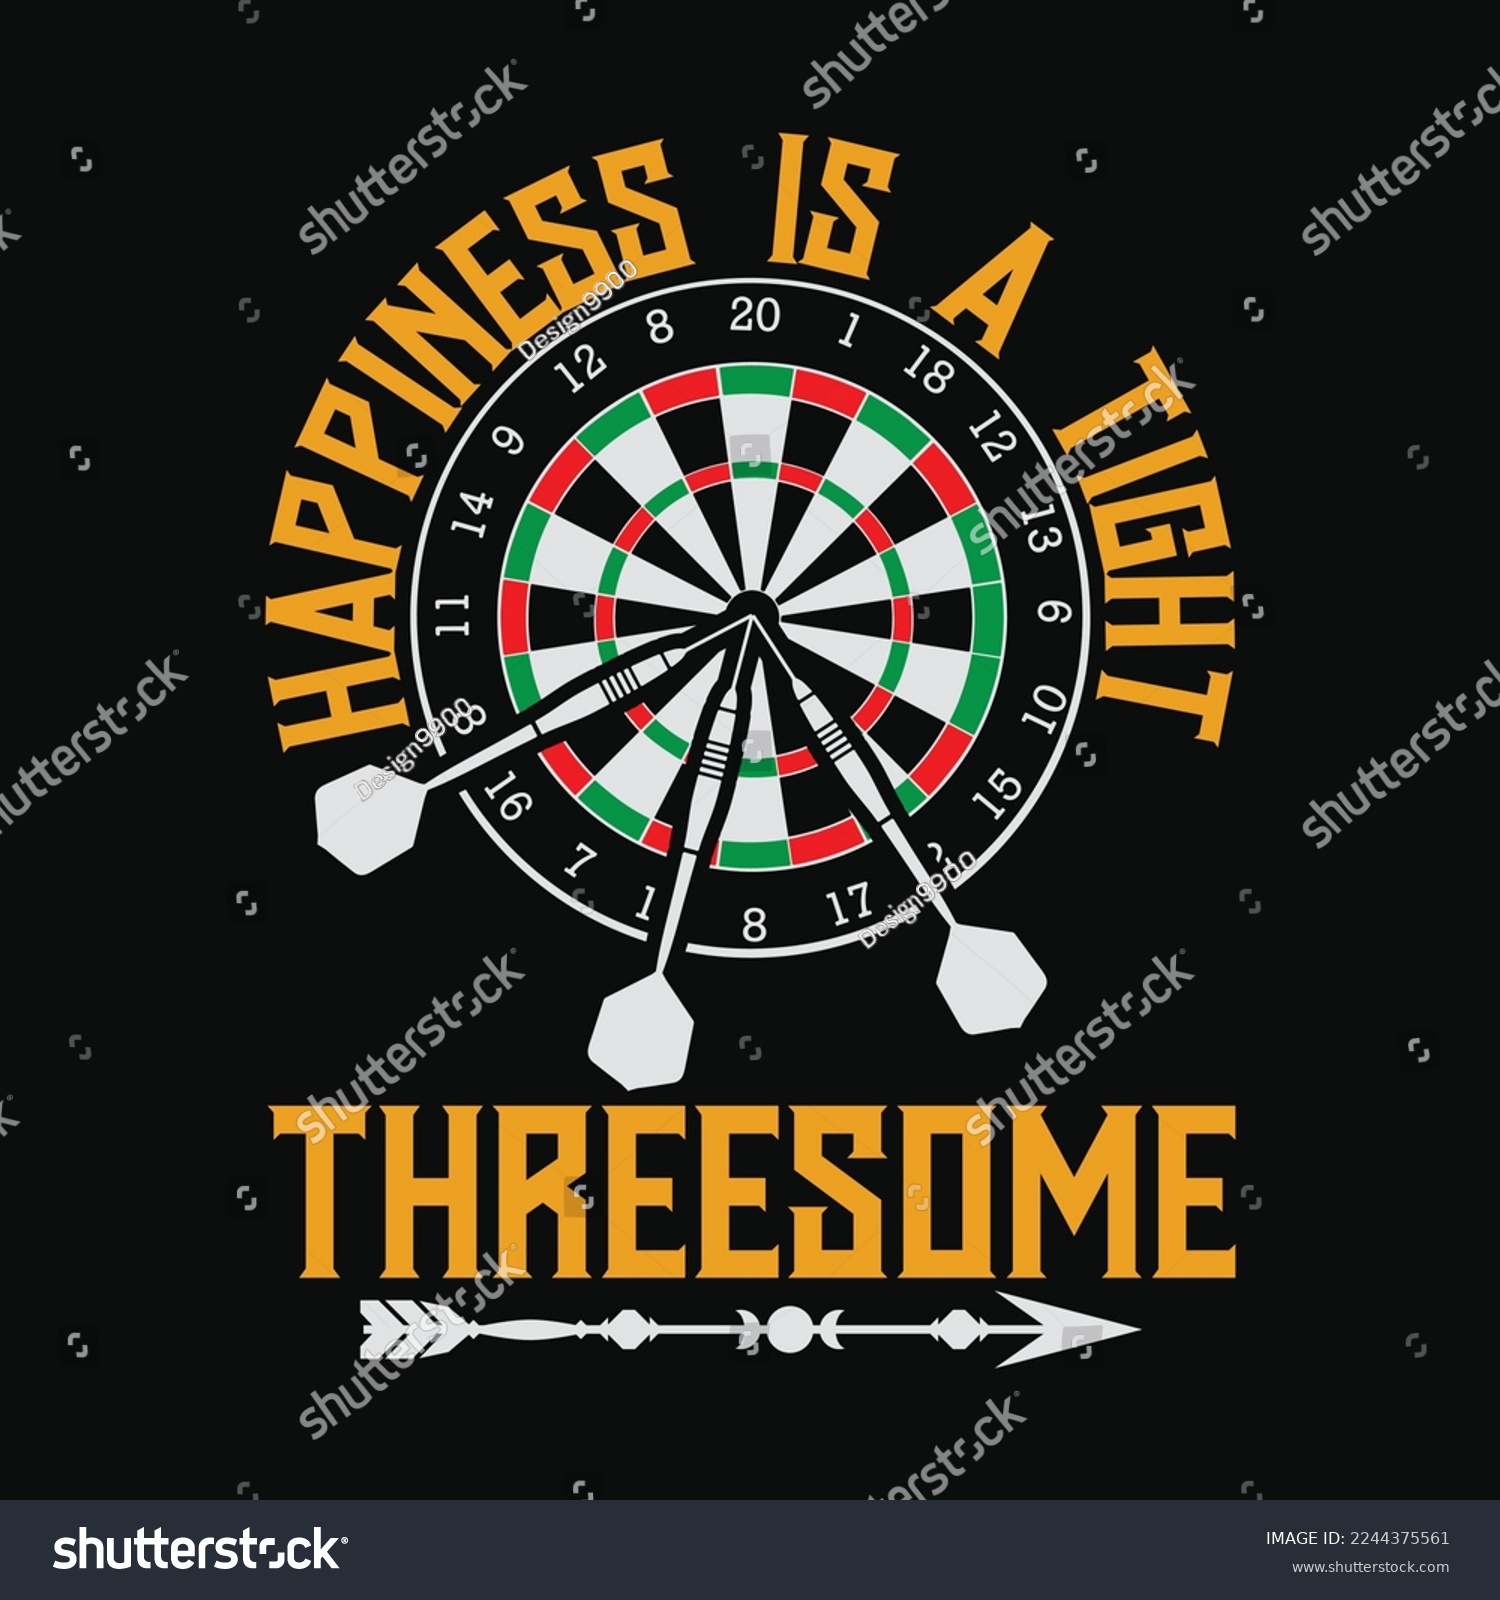 SVG of Drats Player Happiness Is A Tight Threesome svg